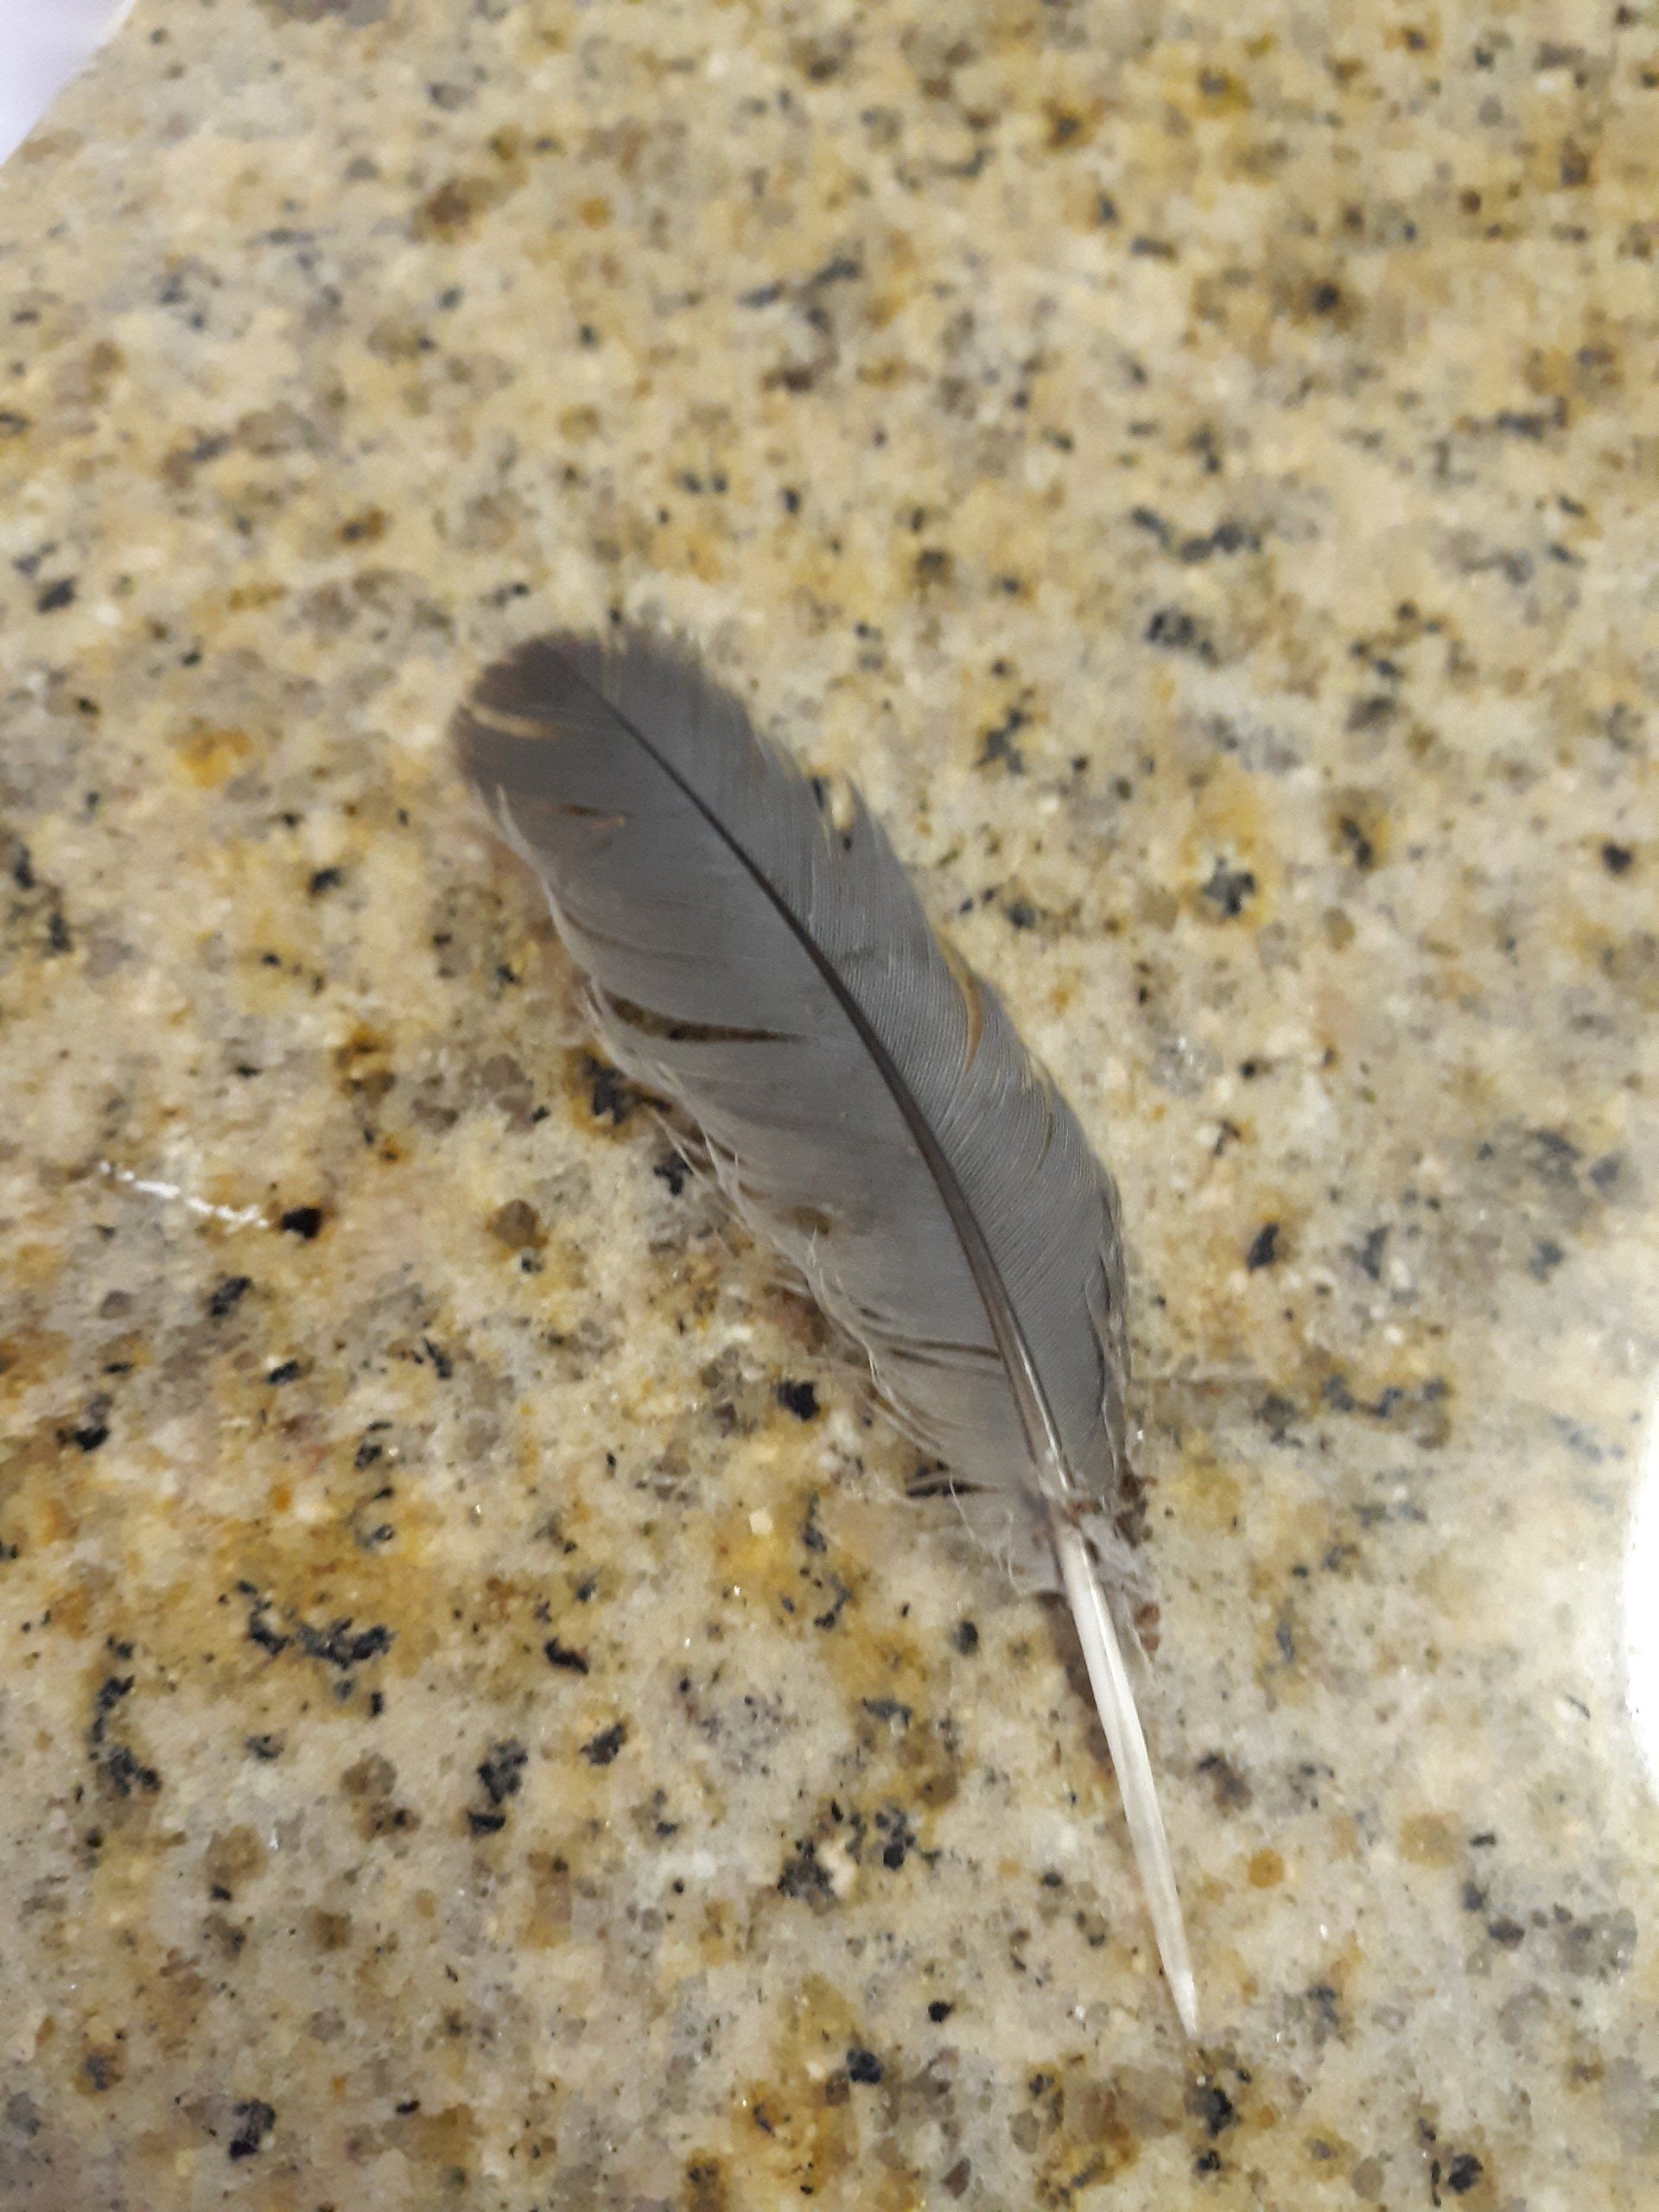 Told our story, he left a feather